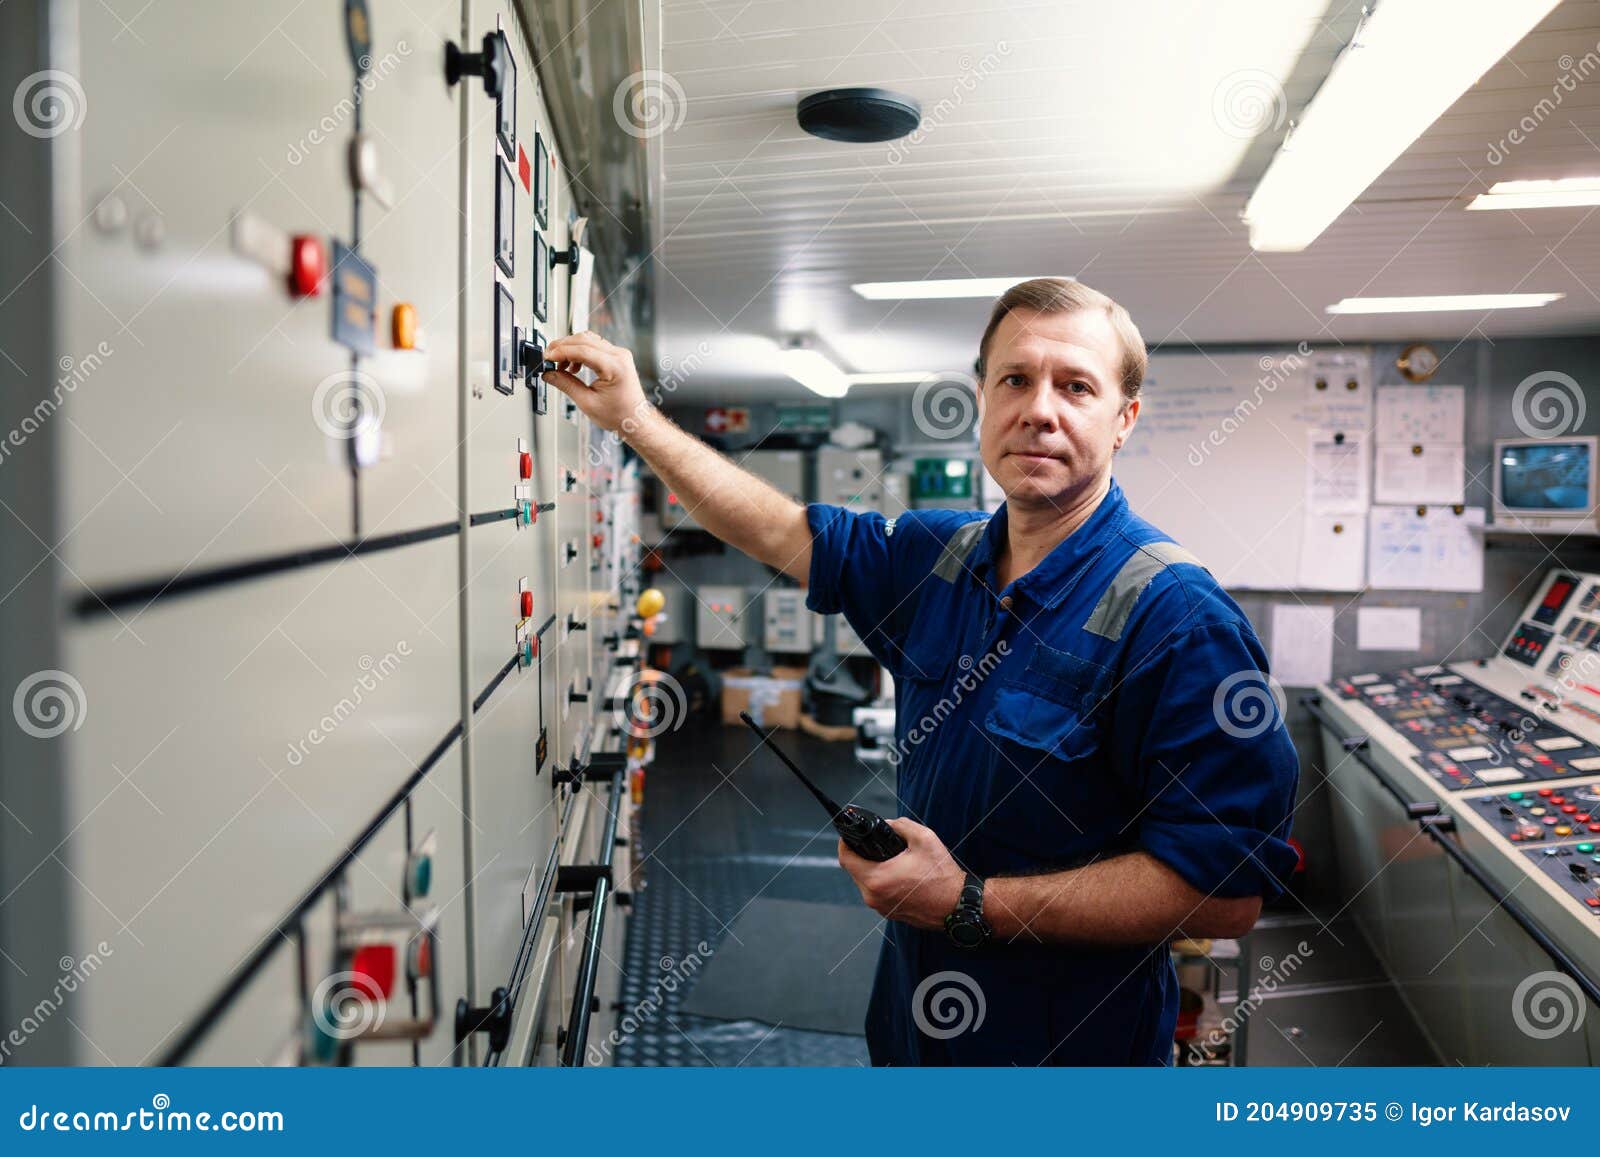 marine engineer officer controlling vessel engines and propulsion in engine control room